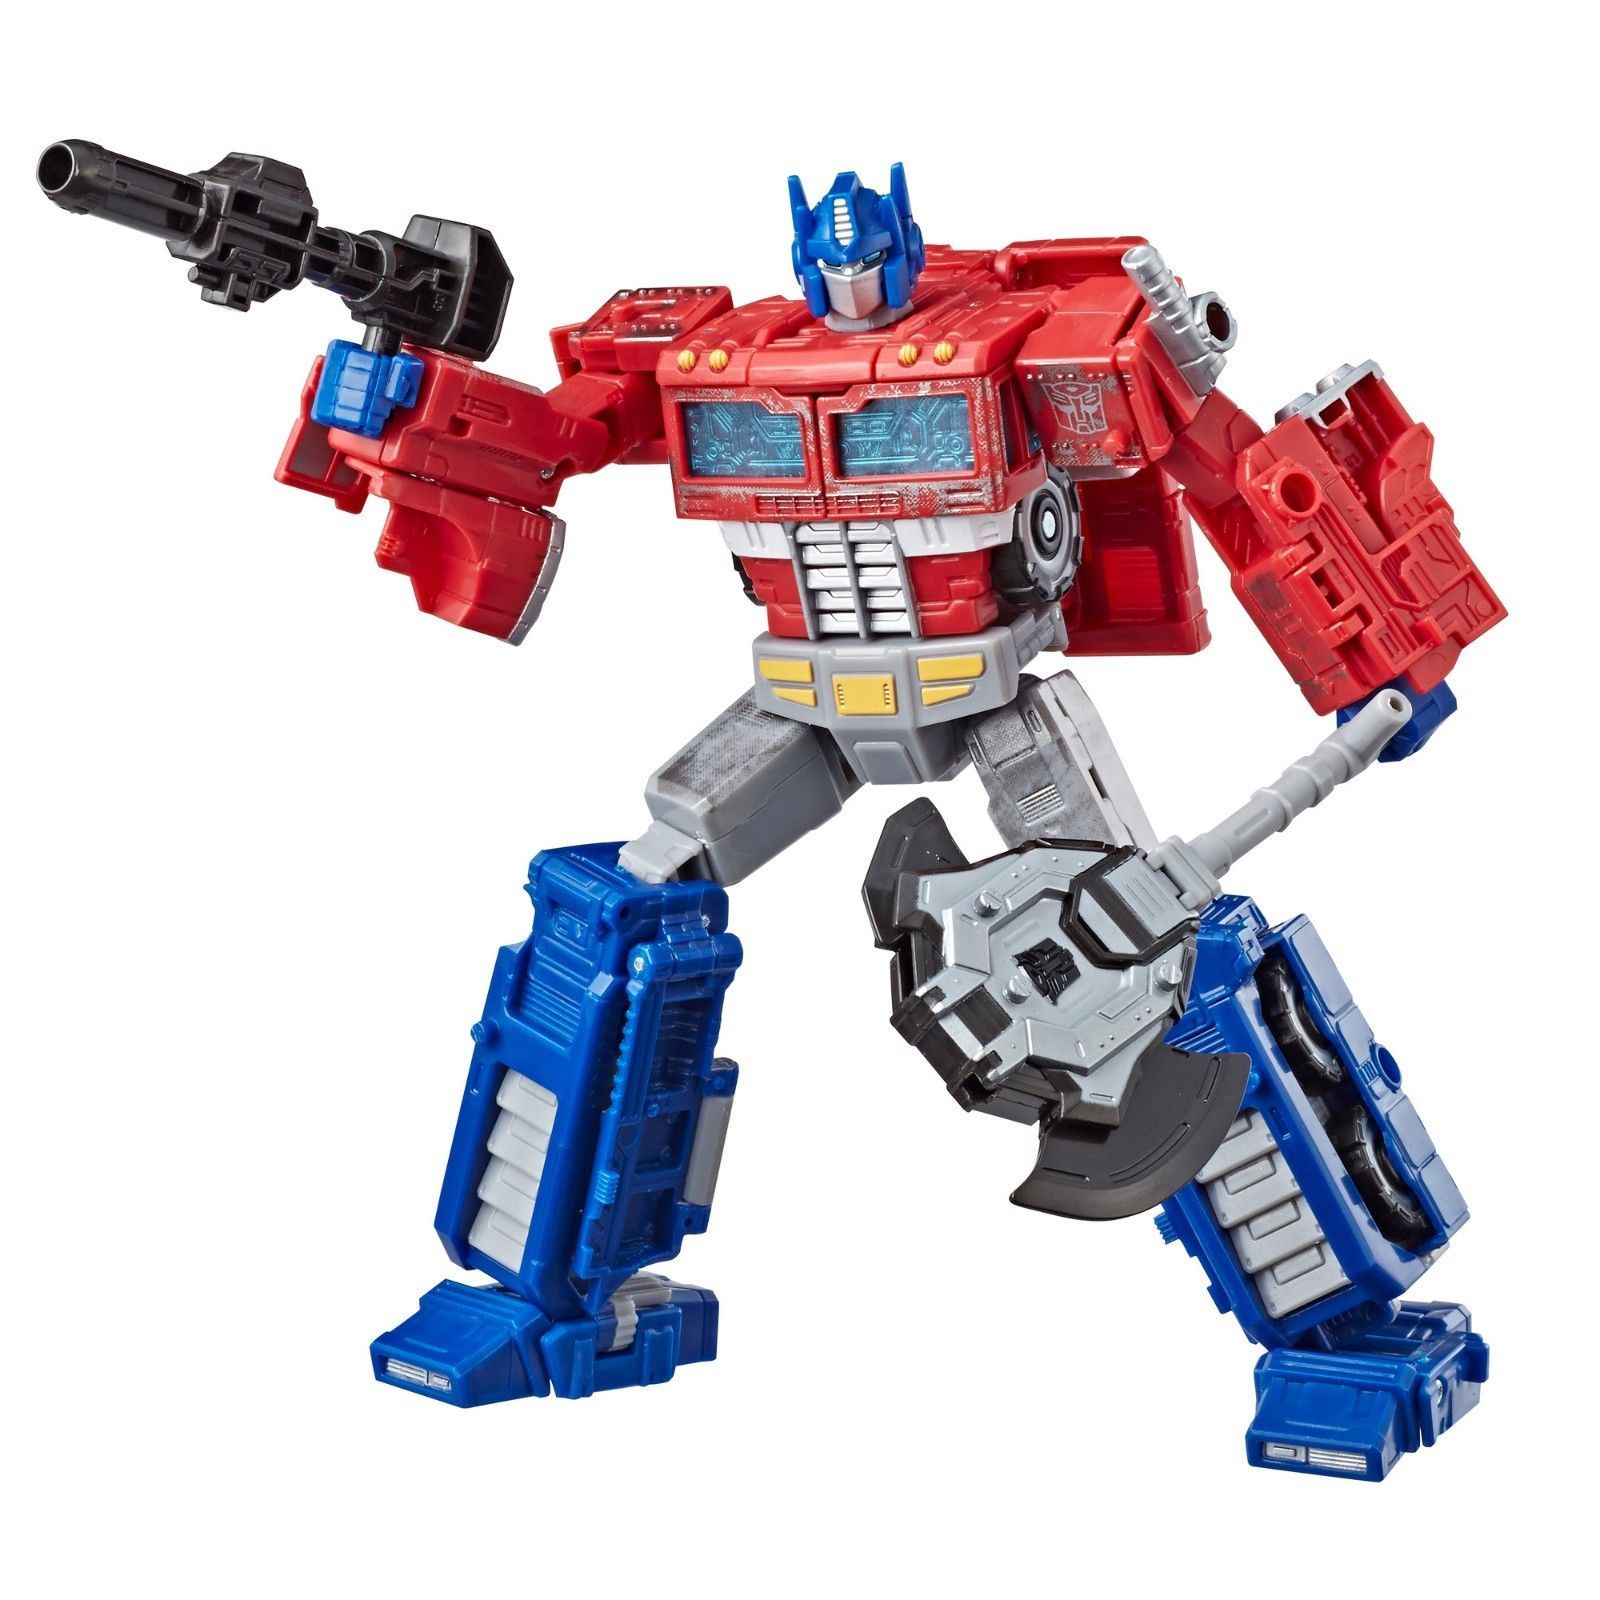 Transformers Generations War For Cybertron: Siege Voyager Optimus Prime Action Figure WFC-S11